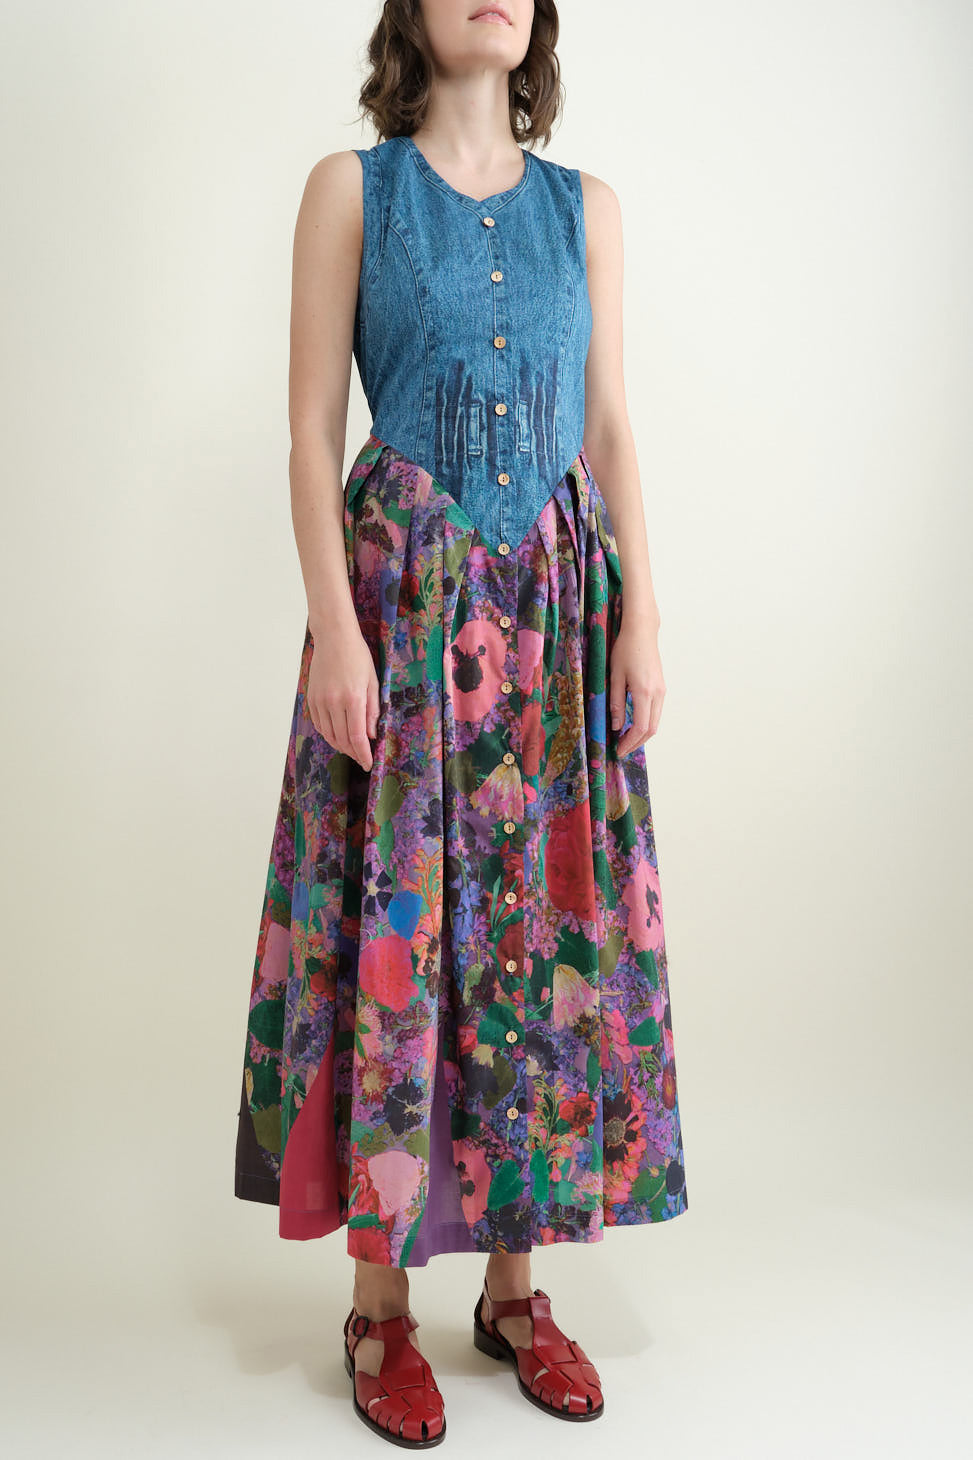 Front of Sleeveless Dress in Jeans and Flowers